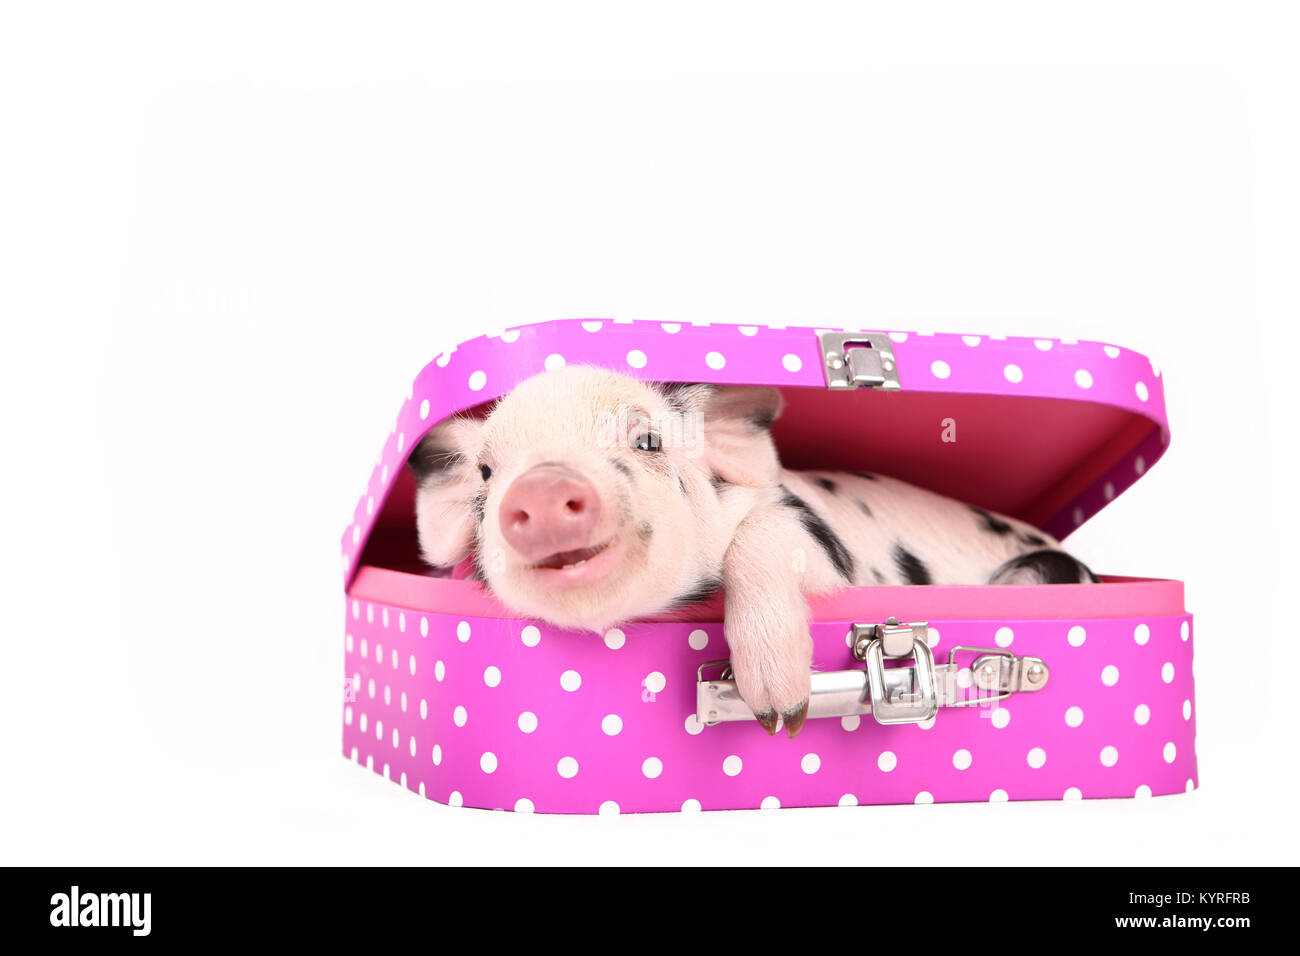 Domestic Pig, Turopolje x ?. Piglet (3 weeks old) lying in a pink suitcase with polka dots. Studio picture seen against a white background. Germany Stock Photo